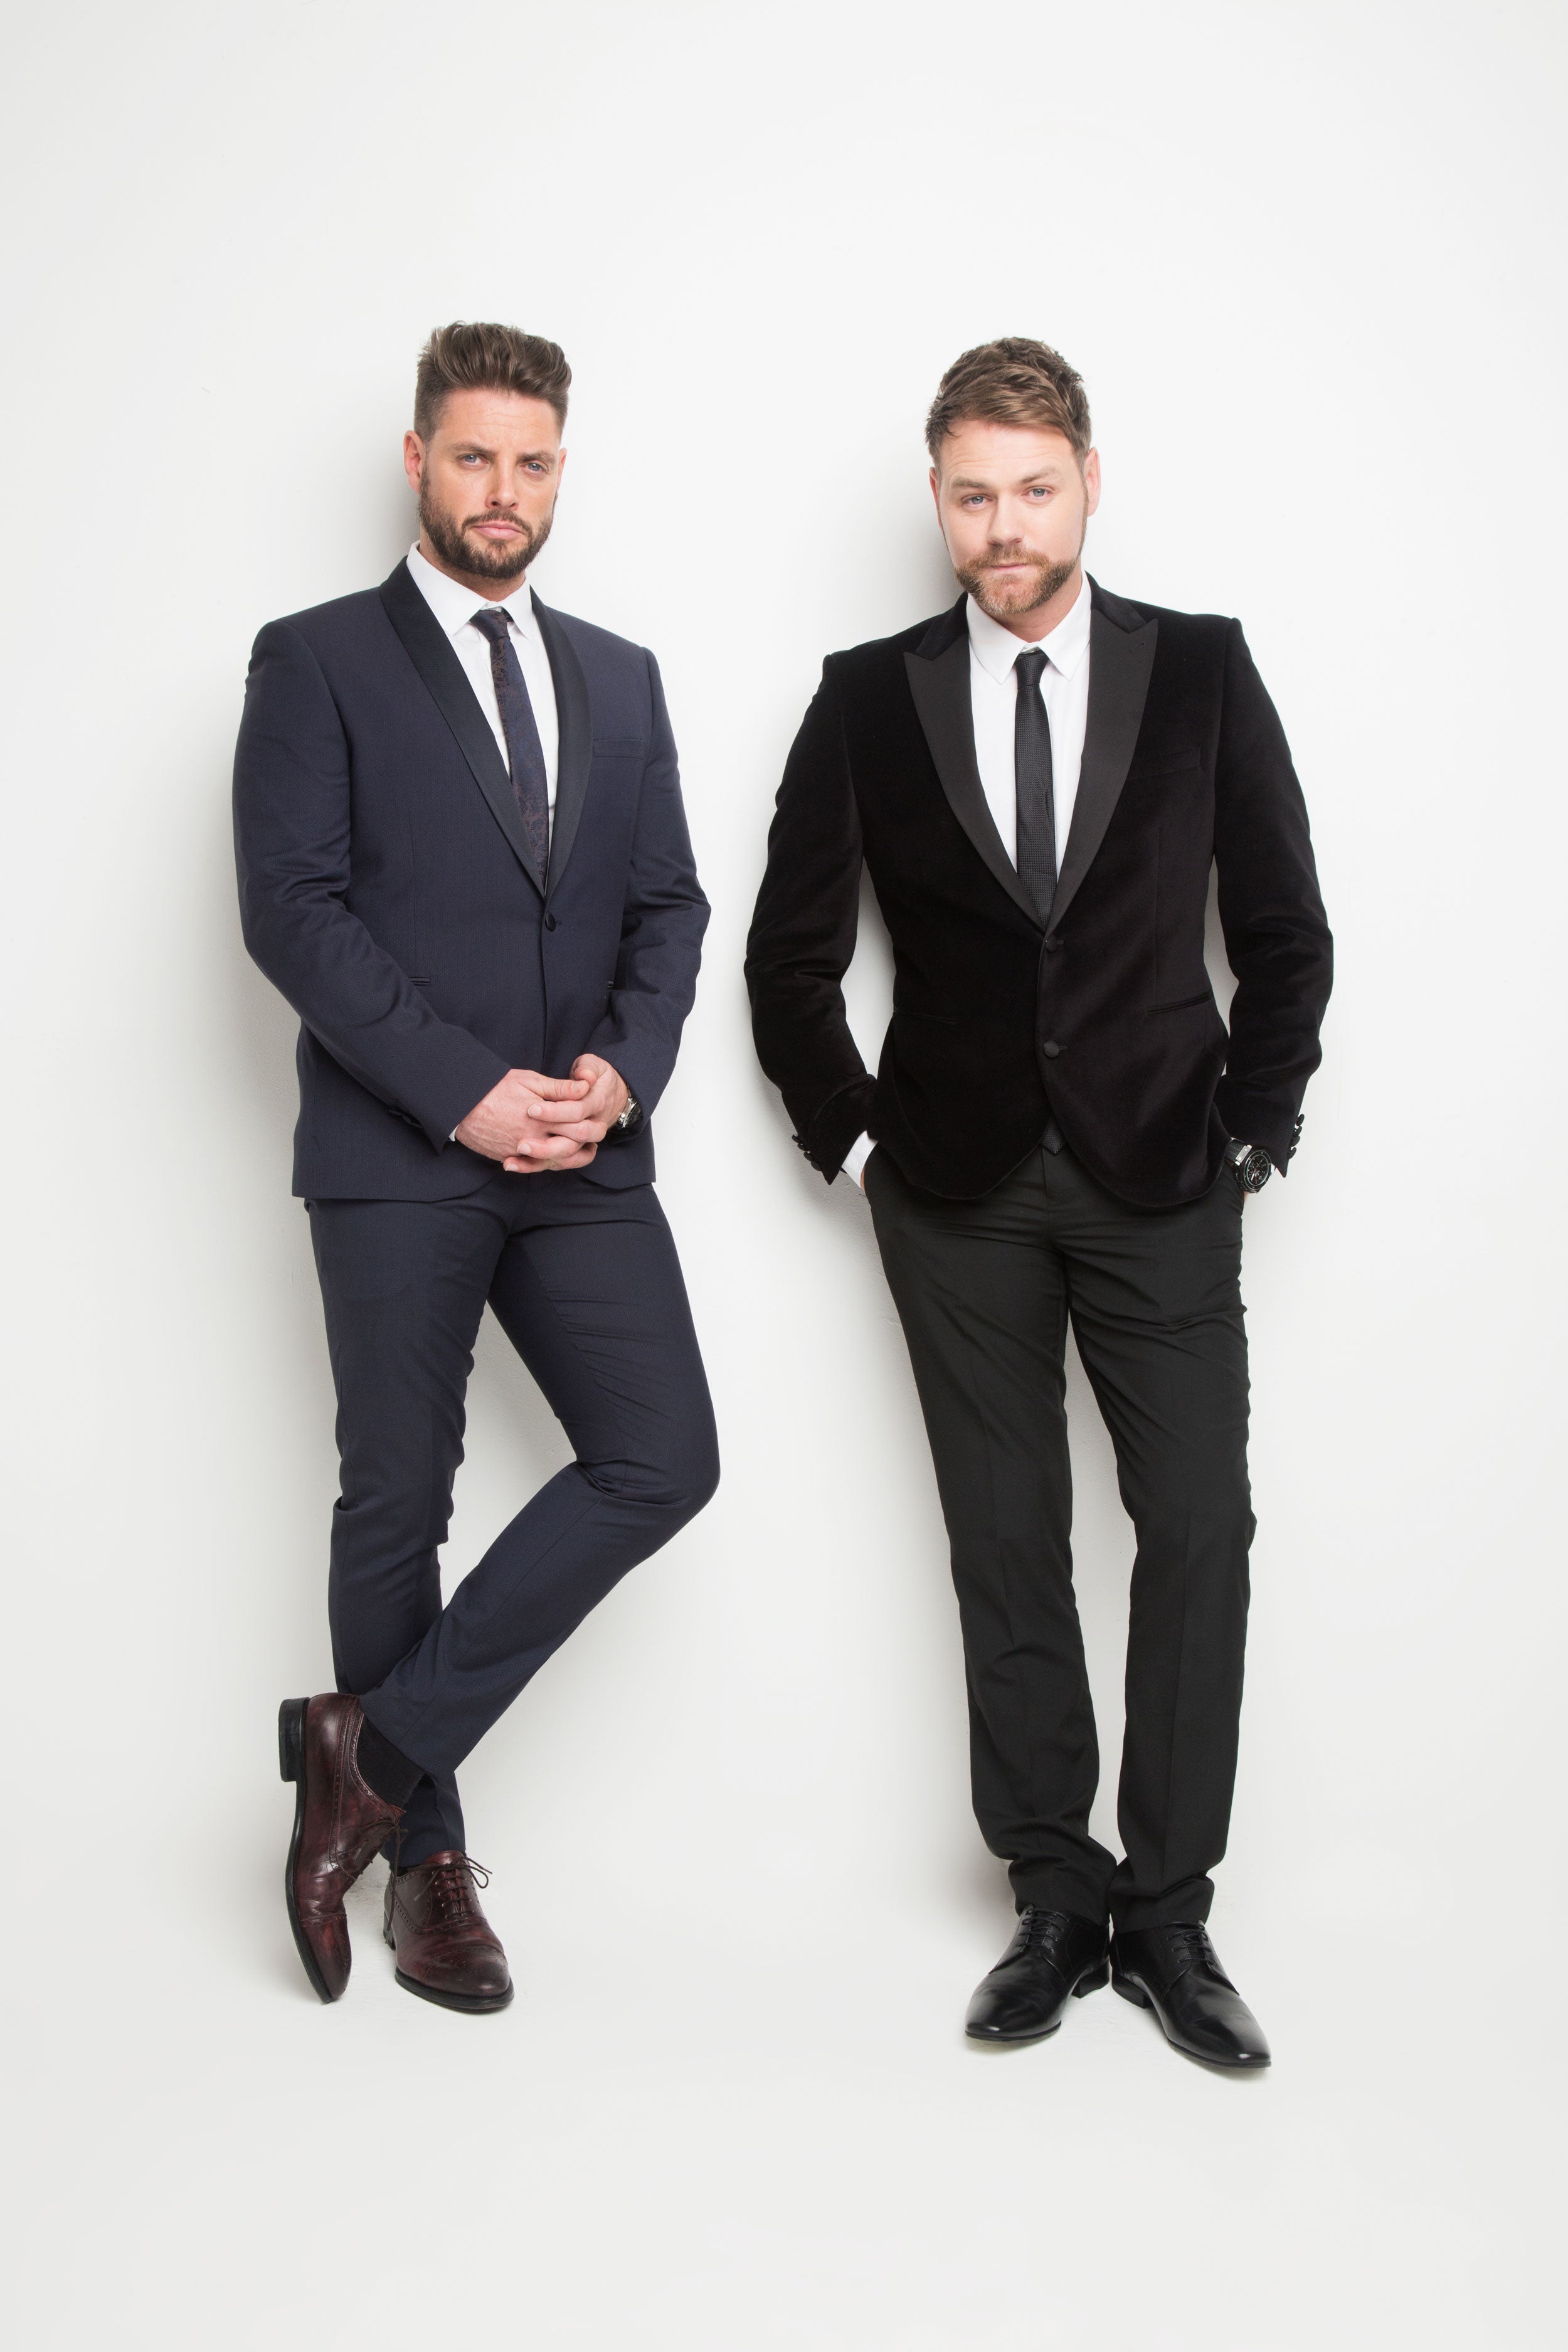 updated presale code to Boyzlife Featuring Keith Duffy & Brian McFadden tickets in Hastings at White Rock Theatre